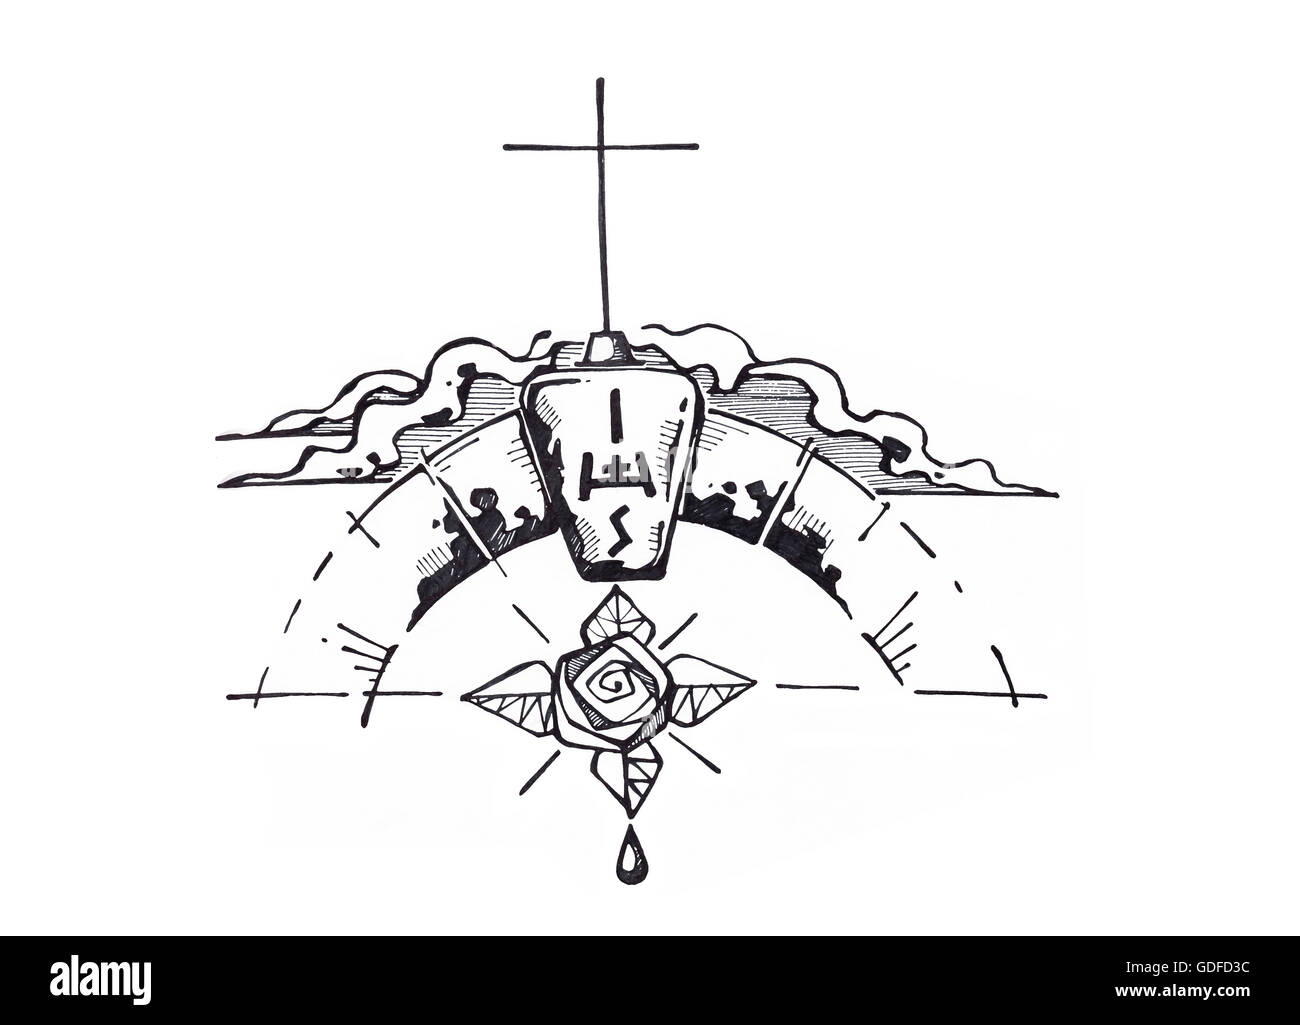 Hand drawn illustration or drawing of some religious symbols Stock Photo